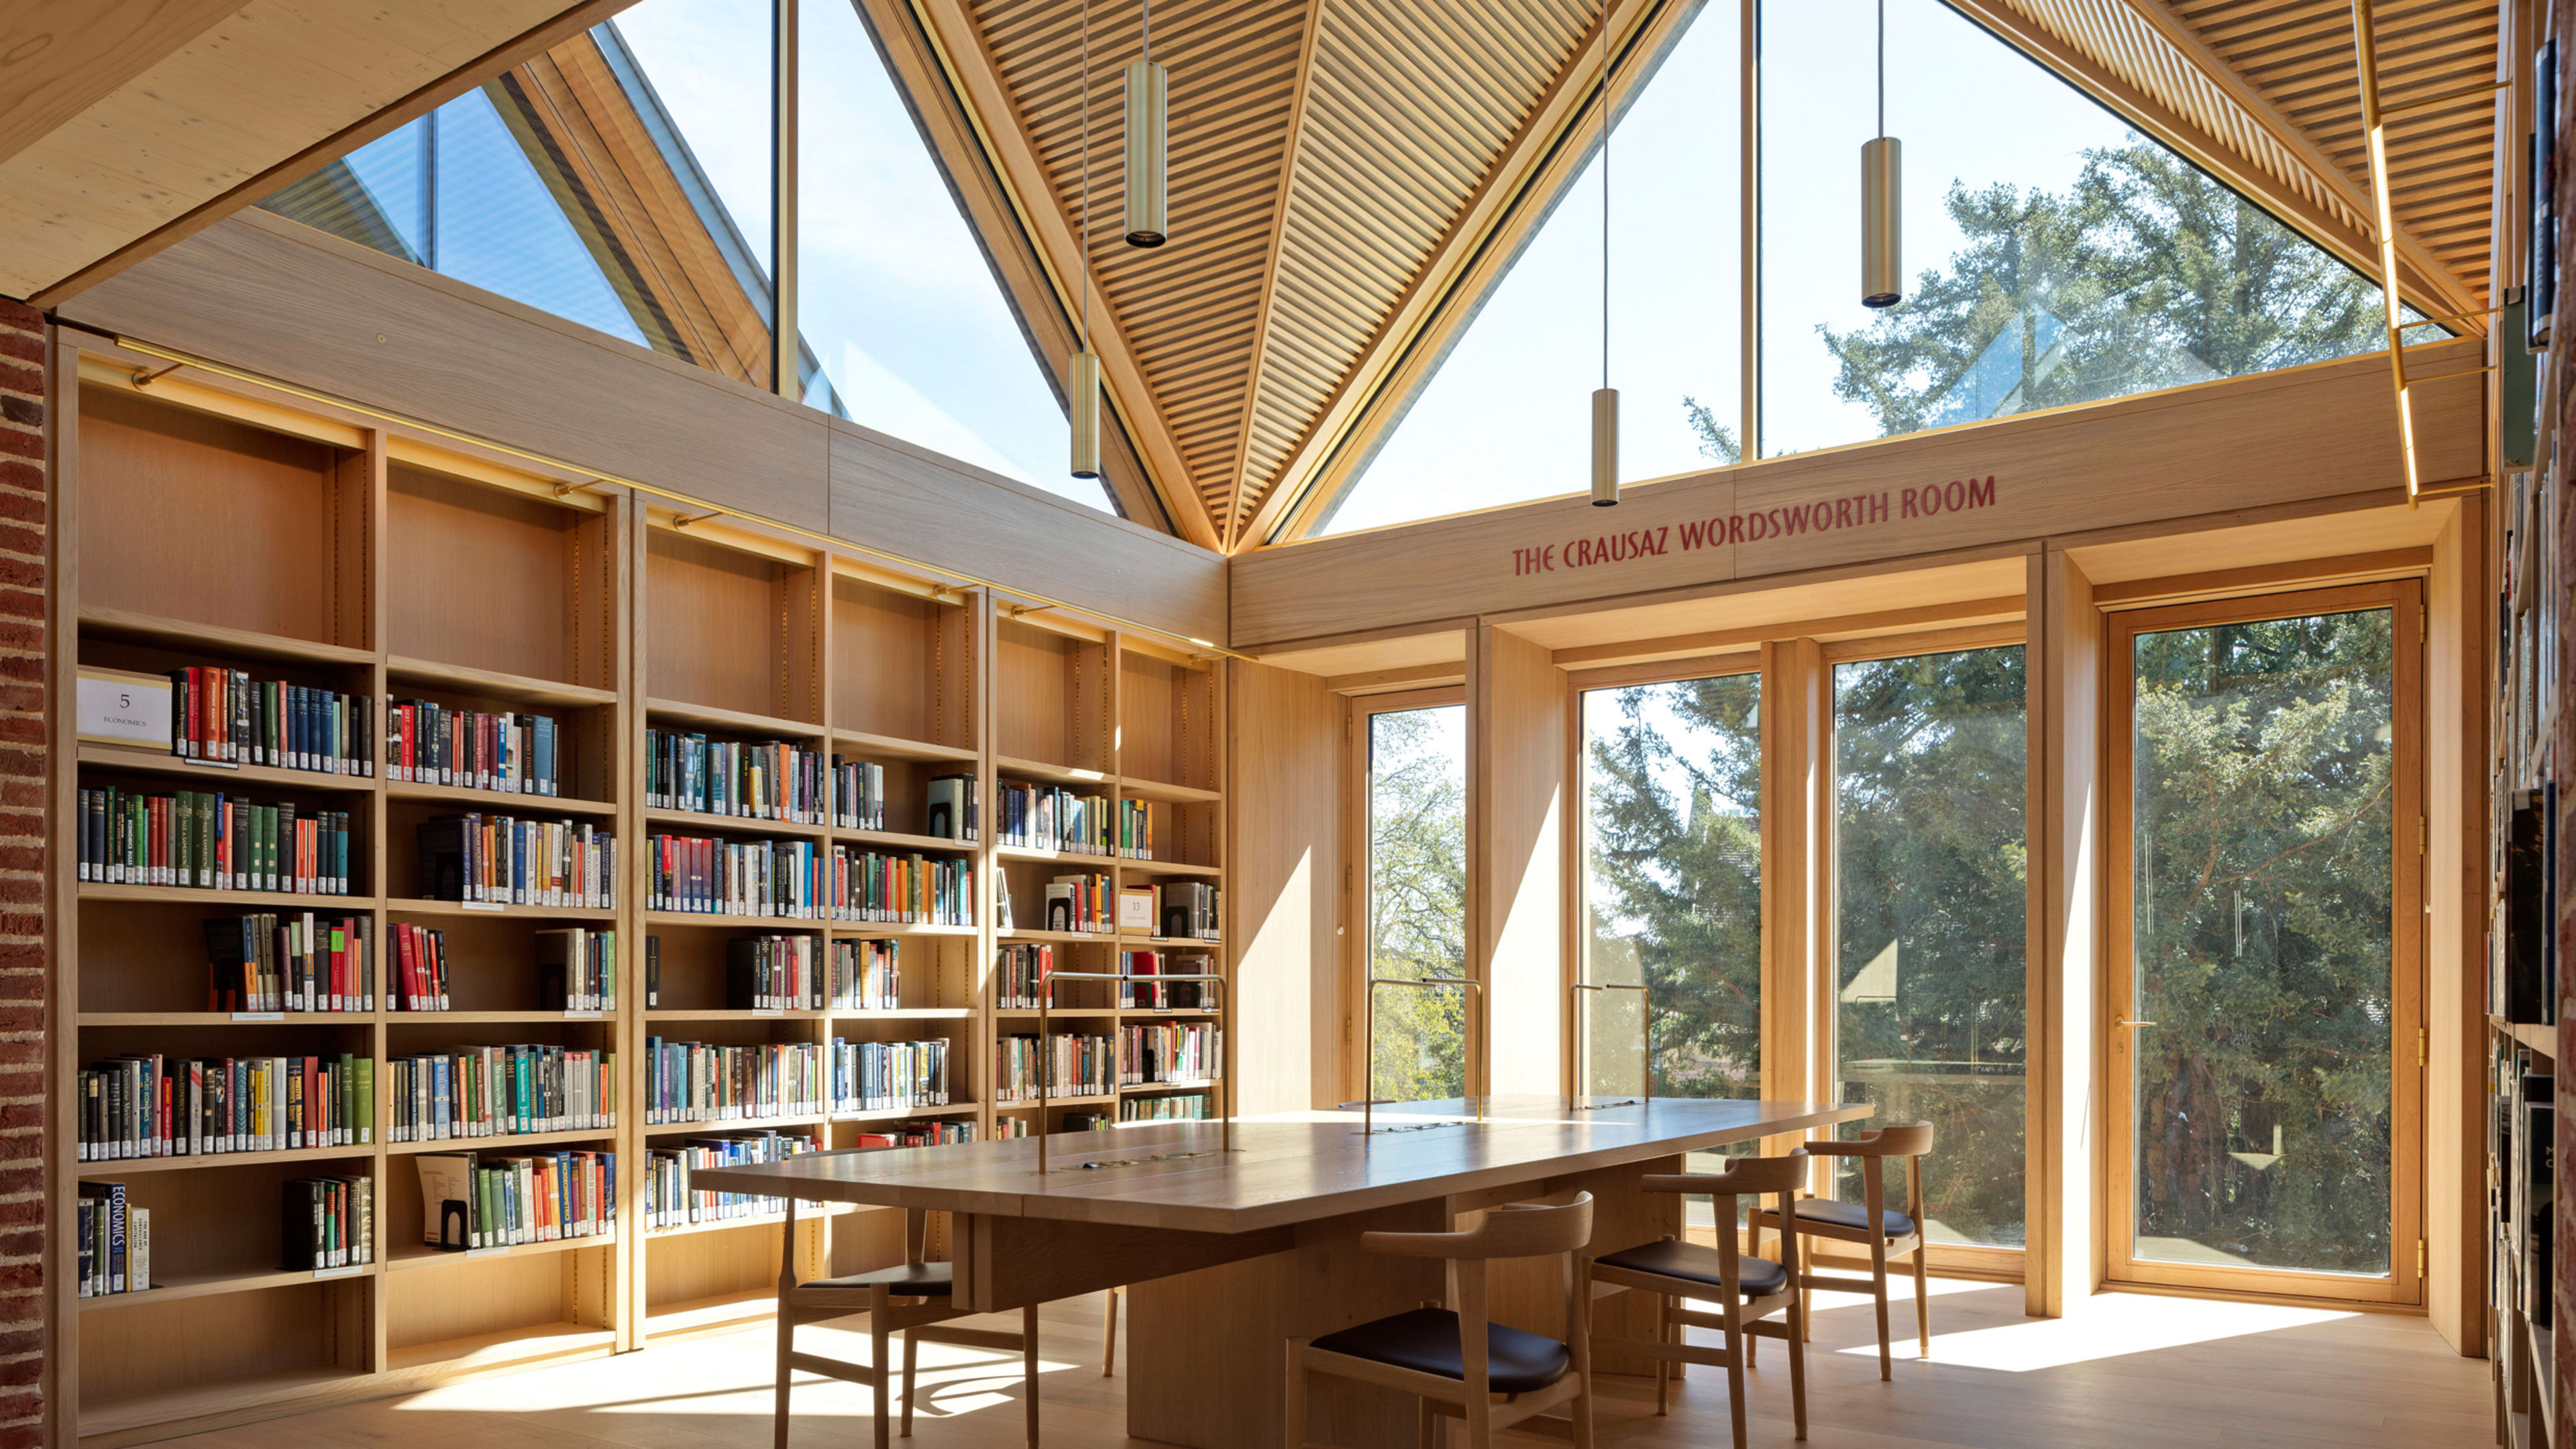 Britain’s top architecture award goes to . . . a library that was built to last 400 years